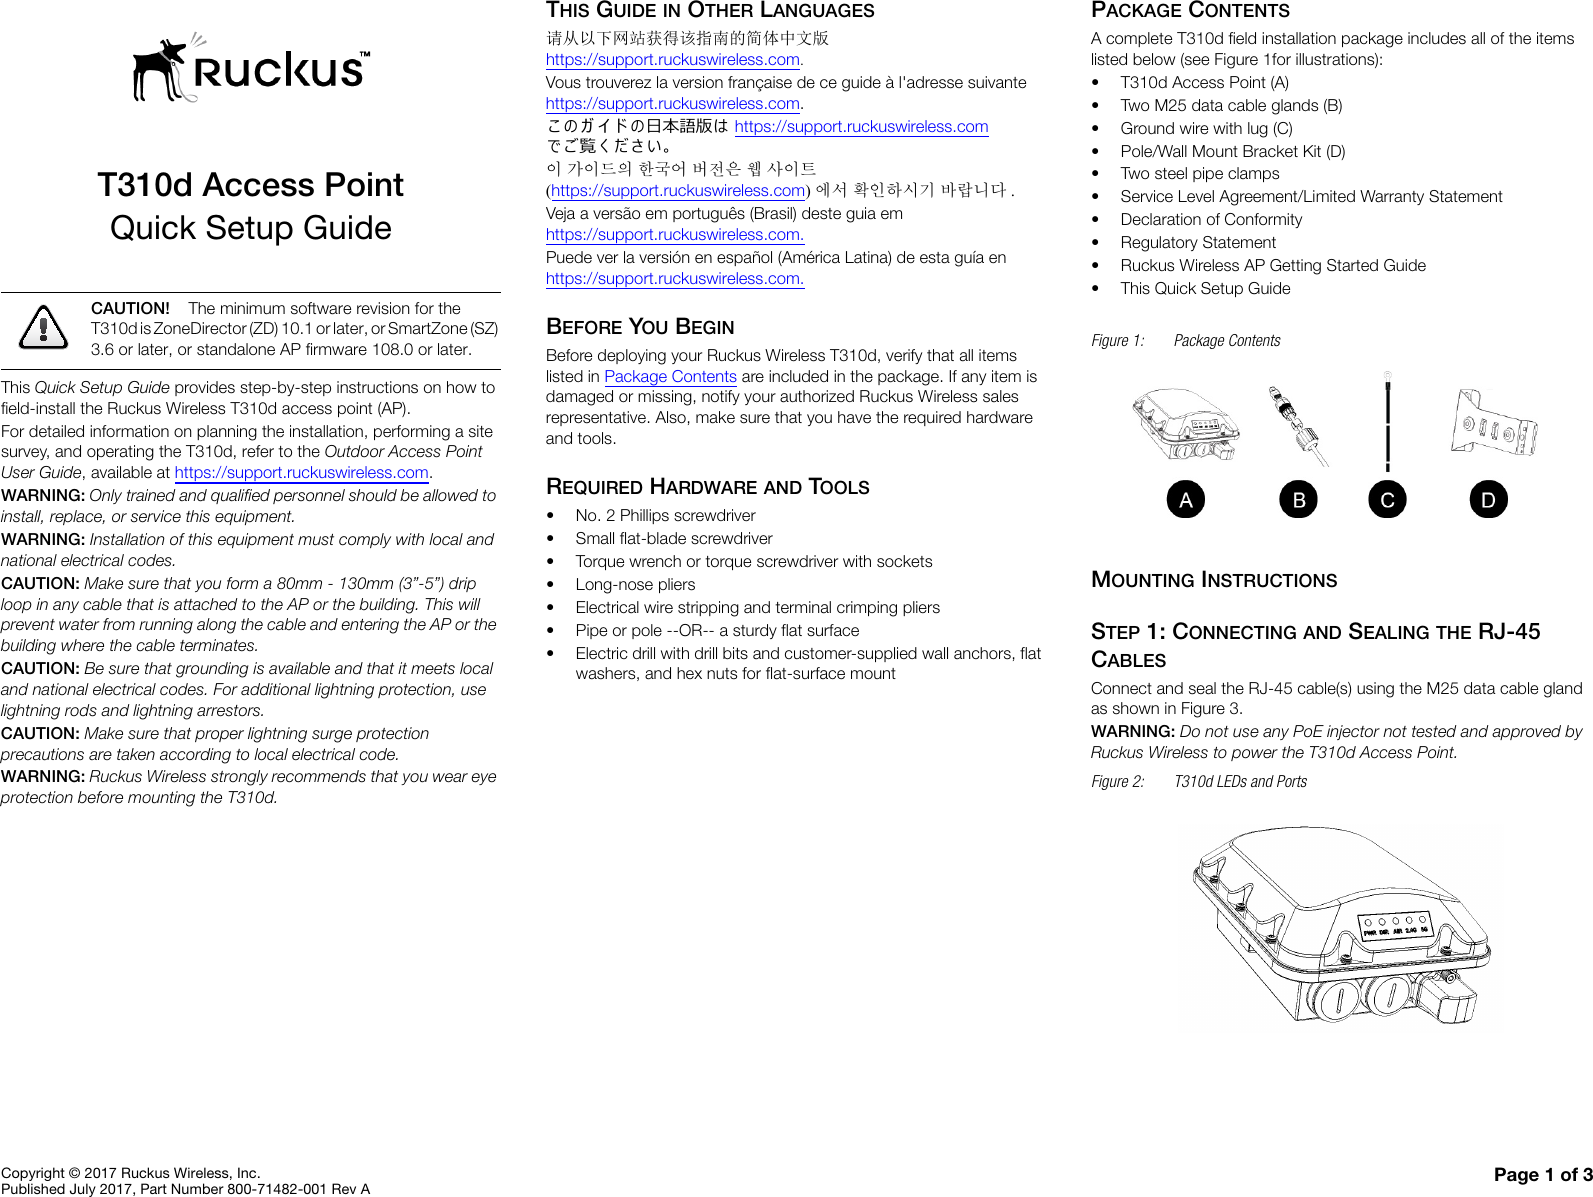 Copyright © 2017 Ruckus Wireless, Inc.Published July 2017, Part Number 800-71482-001 Rev A Page 1 of 3T310d Access PointQuick Setup GuideThis Quick Setup Guide provides step-by-step instructions on how to field-install the Ruckus Wireless T310d access point (AP).For detailed information on planning the installation, performing a site survey, and operating the T310d, refer to the Outdoor Access Point User Guide, available at https://support.ruckuswireless.com.WARNING: Only trained and qualified personnel should be allowed to install, replace, or service this equipment. WARNING: Installation of this equipment must comply with local and national electrical codes. CAUTION: Make sure that you form a 80mm - 130mm (3”-5”) drip loop in any cable that is attached to the AP or the building. This will prevent water from running along the cable and entering the AP or the building where the cable terminates. CAUTION: Be sure that grounding is available and that it meets local and national electrical codes. For additional lightning protection, use lightning rods and lightning arrestors. CAUTION: Make sure that proper lightning surge protection precautions are taken according to local electrical code. WARNING: Ruckus Wireless strongly recommends that you wear eye protection before mounting the T310d.THIS GUIDE IN OTHER LANGUAGES请从以下网站获得该指南的简体中文版 https://support.ruckuswireless.com.Vous trouverez la version française de ce guide à l&apos;adresse suivante https://support.ruckuswireless.com.こ の ガ イ ド の⽇本語版は https://support.ruckuswireless.com でご覧く ださい。이 가이드의 한국어 버전은 웹 사이트(https://support.ruckuswireless.com)에서 확인하시기 바랍니다 .Veja a versão em português (Brasil) deste guia em https://support.ruckuswireless.com.Puede ver la versión en español (América Latina) de esta guía en https://support.ruckuswireless.com.BEFORE YOU BEGINBefore deploying your Ruckus Wireless T310d, verify that all items listed in Package Contents are included in the package. If any item is damaged or missing, notify your authorized Ruckus Wireless sales representative. Also, make sure that you have the required hardware and tools. REQUIRED HARDWARE AND TOOLS• No. 2 Phillips screwdriver• Small flat-blade screwdriver• Torque wrench or torque screwdriver with sockets• Long-nose pliers• Electrical wire stripping and terminal crimping pliers• Pipe or pole --OR-- a sturdy flat surface• Electric drill with drill bits and customer-supplied wall anchors, flat washers, and hex nuts for flat-surface mountPACKAGE CONTENTSA complete T310d field installation package includes all of the items listed below (see Figure 1for illustrations):• T310d Access Point (A)• Two M25 data cable glands (B)• Ground wire with lug (C)• Pole/Wall Mount Bracket Kit (D)• Two steel pipe clamps• Service Level Agreement/Limited Warranty Statement• Declaration of Conformity• Regulatory Statement• Ruckus Wireless AP Getting Started Guide• This Quick Setup GuideFigure 1: Package ContentsMOUNTING INSTRUCTIONSSTEP 1: CONNECTING AND SEALING THE RJ-45 CABLESConnect and seal the RJ-45 cable(s) using the M25 data cable gland as shown in Figure 3.WARNING: Do not use any PoE injector not tested and approved by Ruckus Wireless to power the T310d Access Point. Figure 2: T310d LEDs and Ports CAUTION! The minimum software revision for the T310d is ZoneDirector (ZD) 10.1 or later, or SmartZone (SZ) 3.6 or later, or standalone AP firmware 108.0 or later.